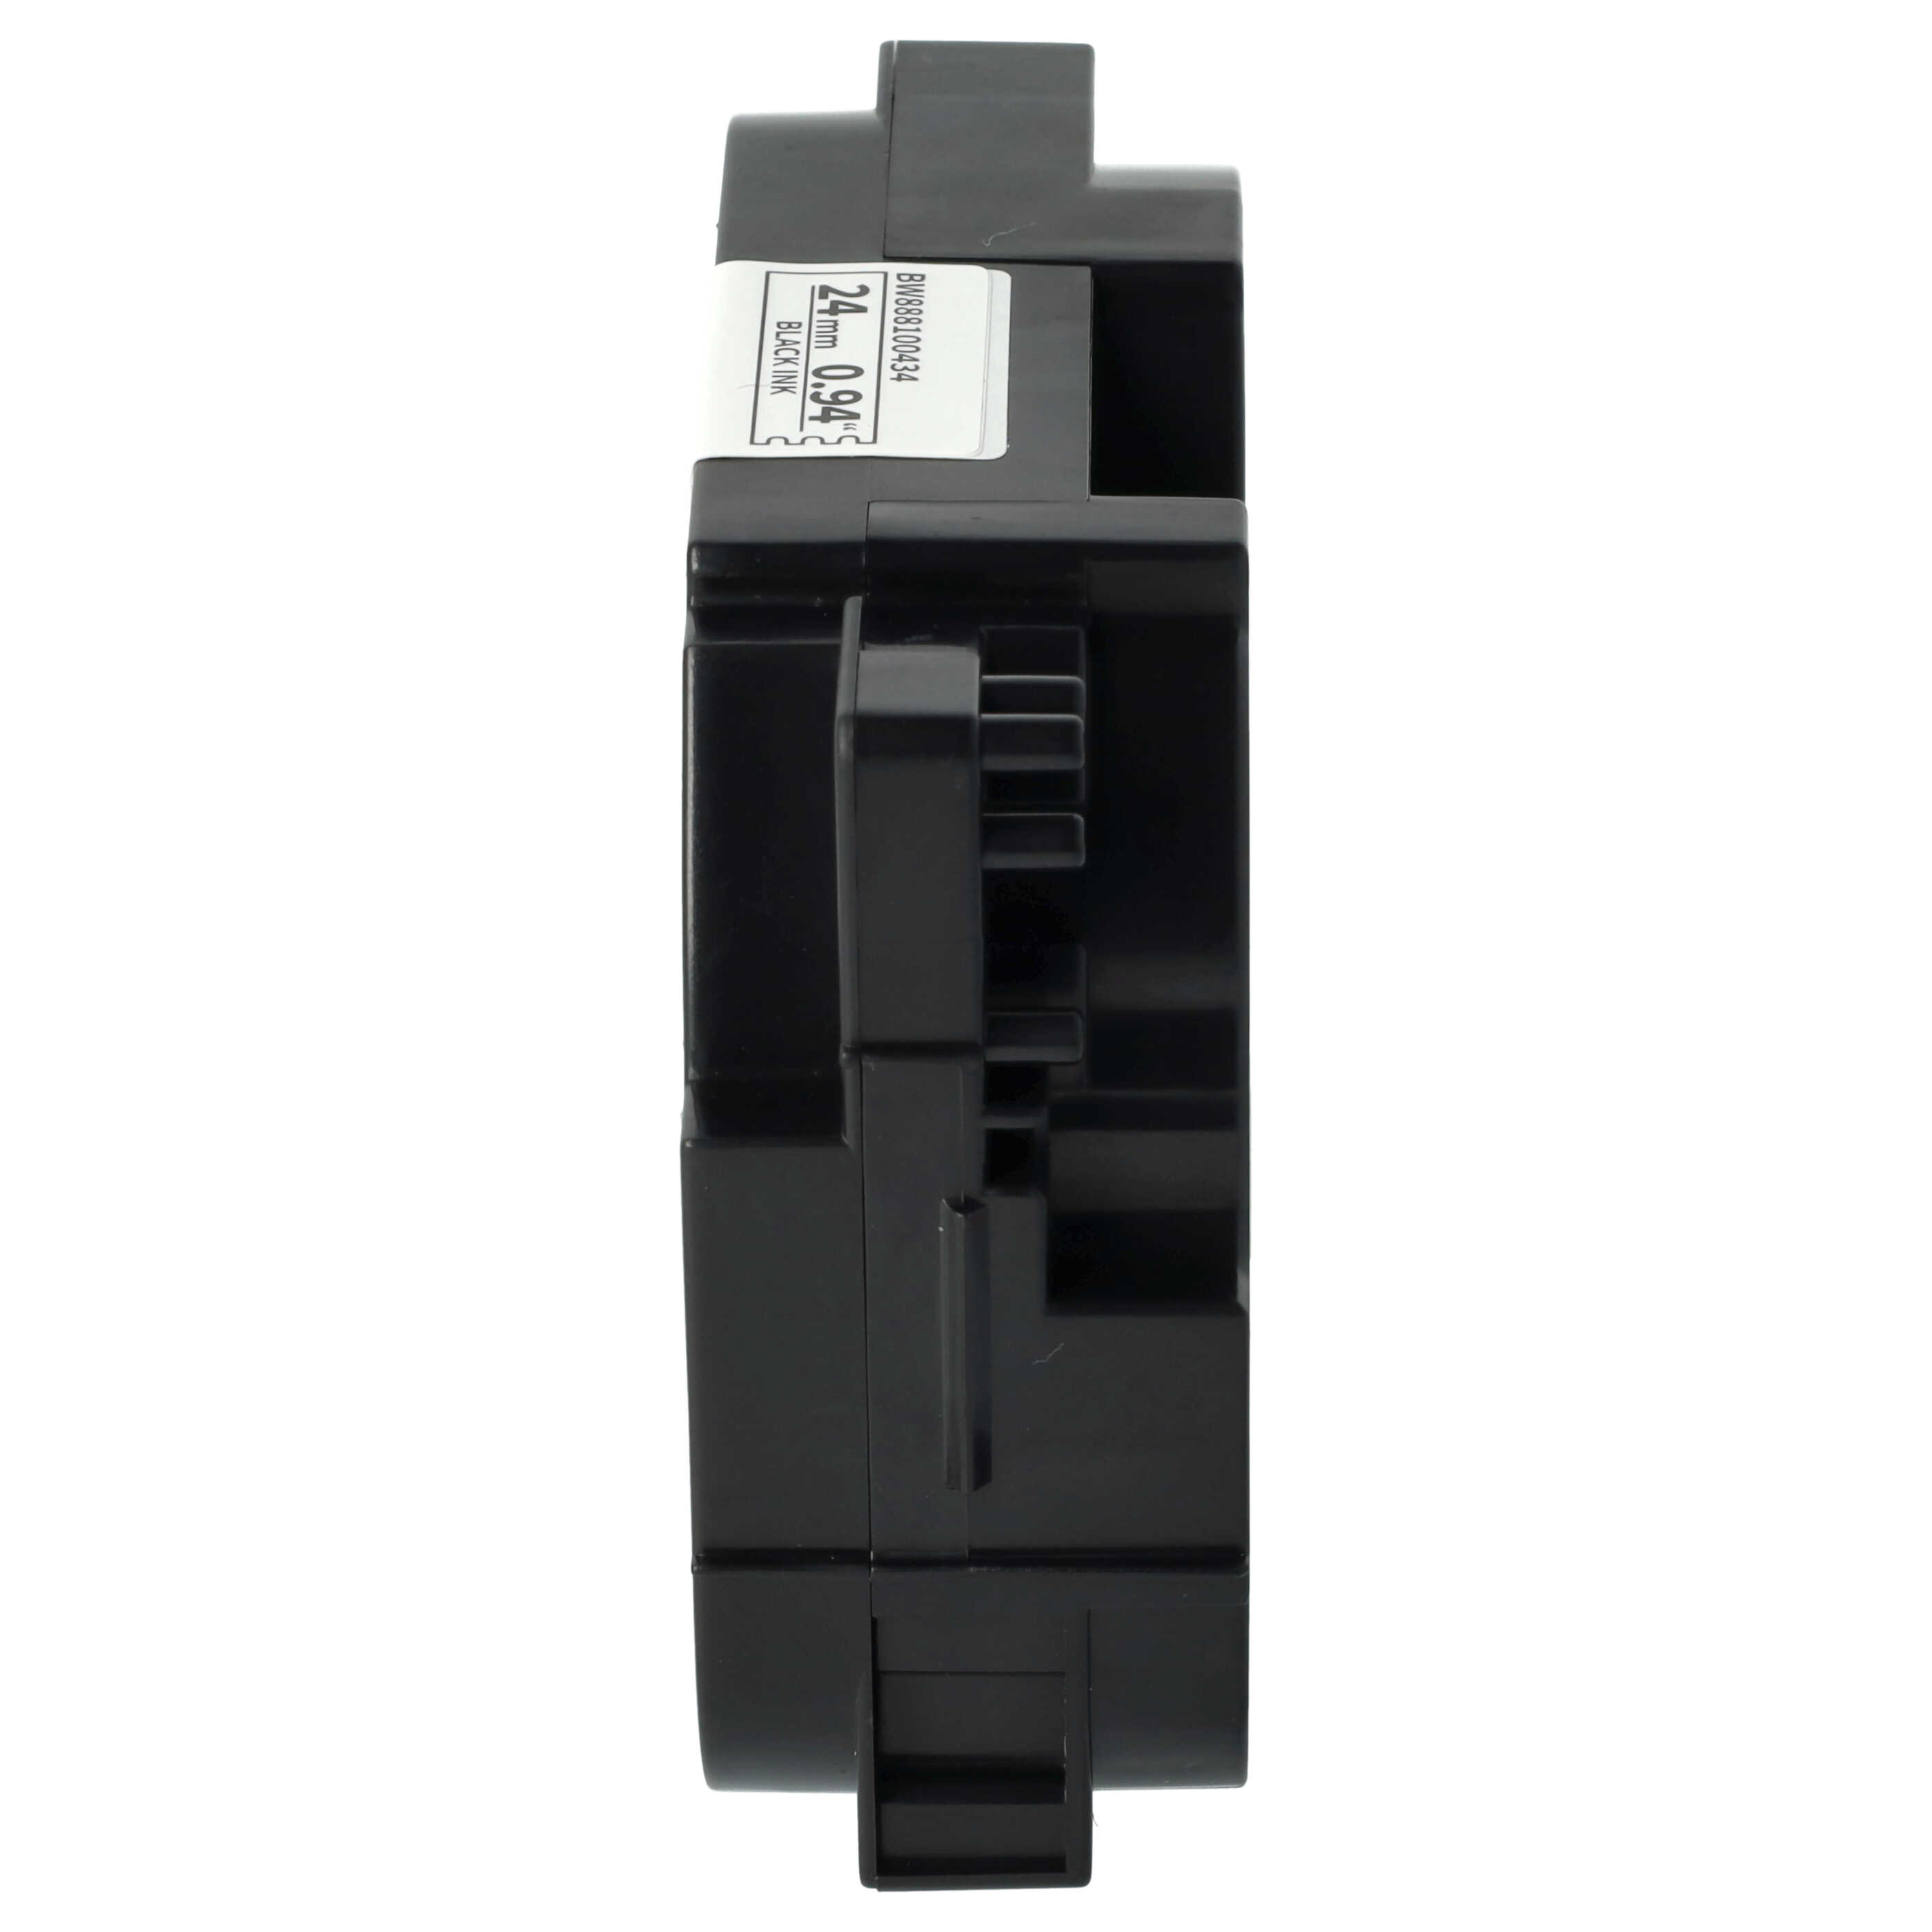 Label Tape as Replacement for Brother TZE-S251 - 24 mm Black to White, Extra Stark